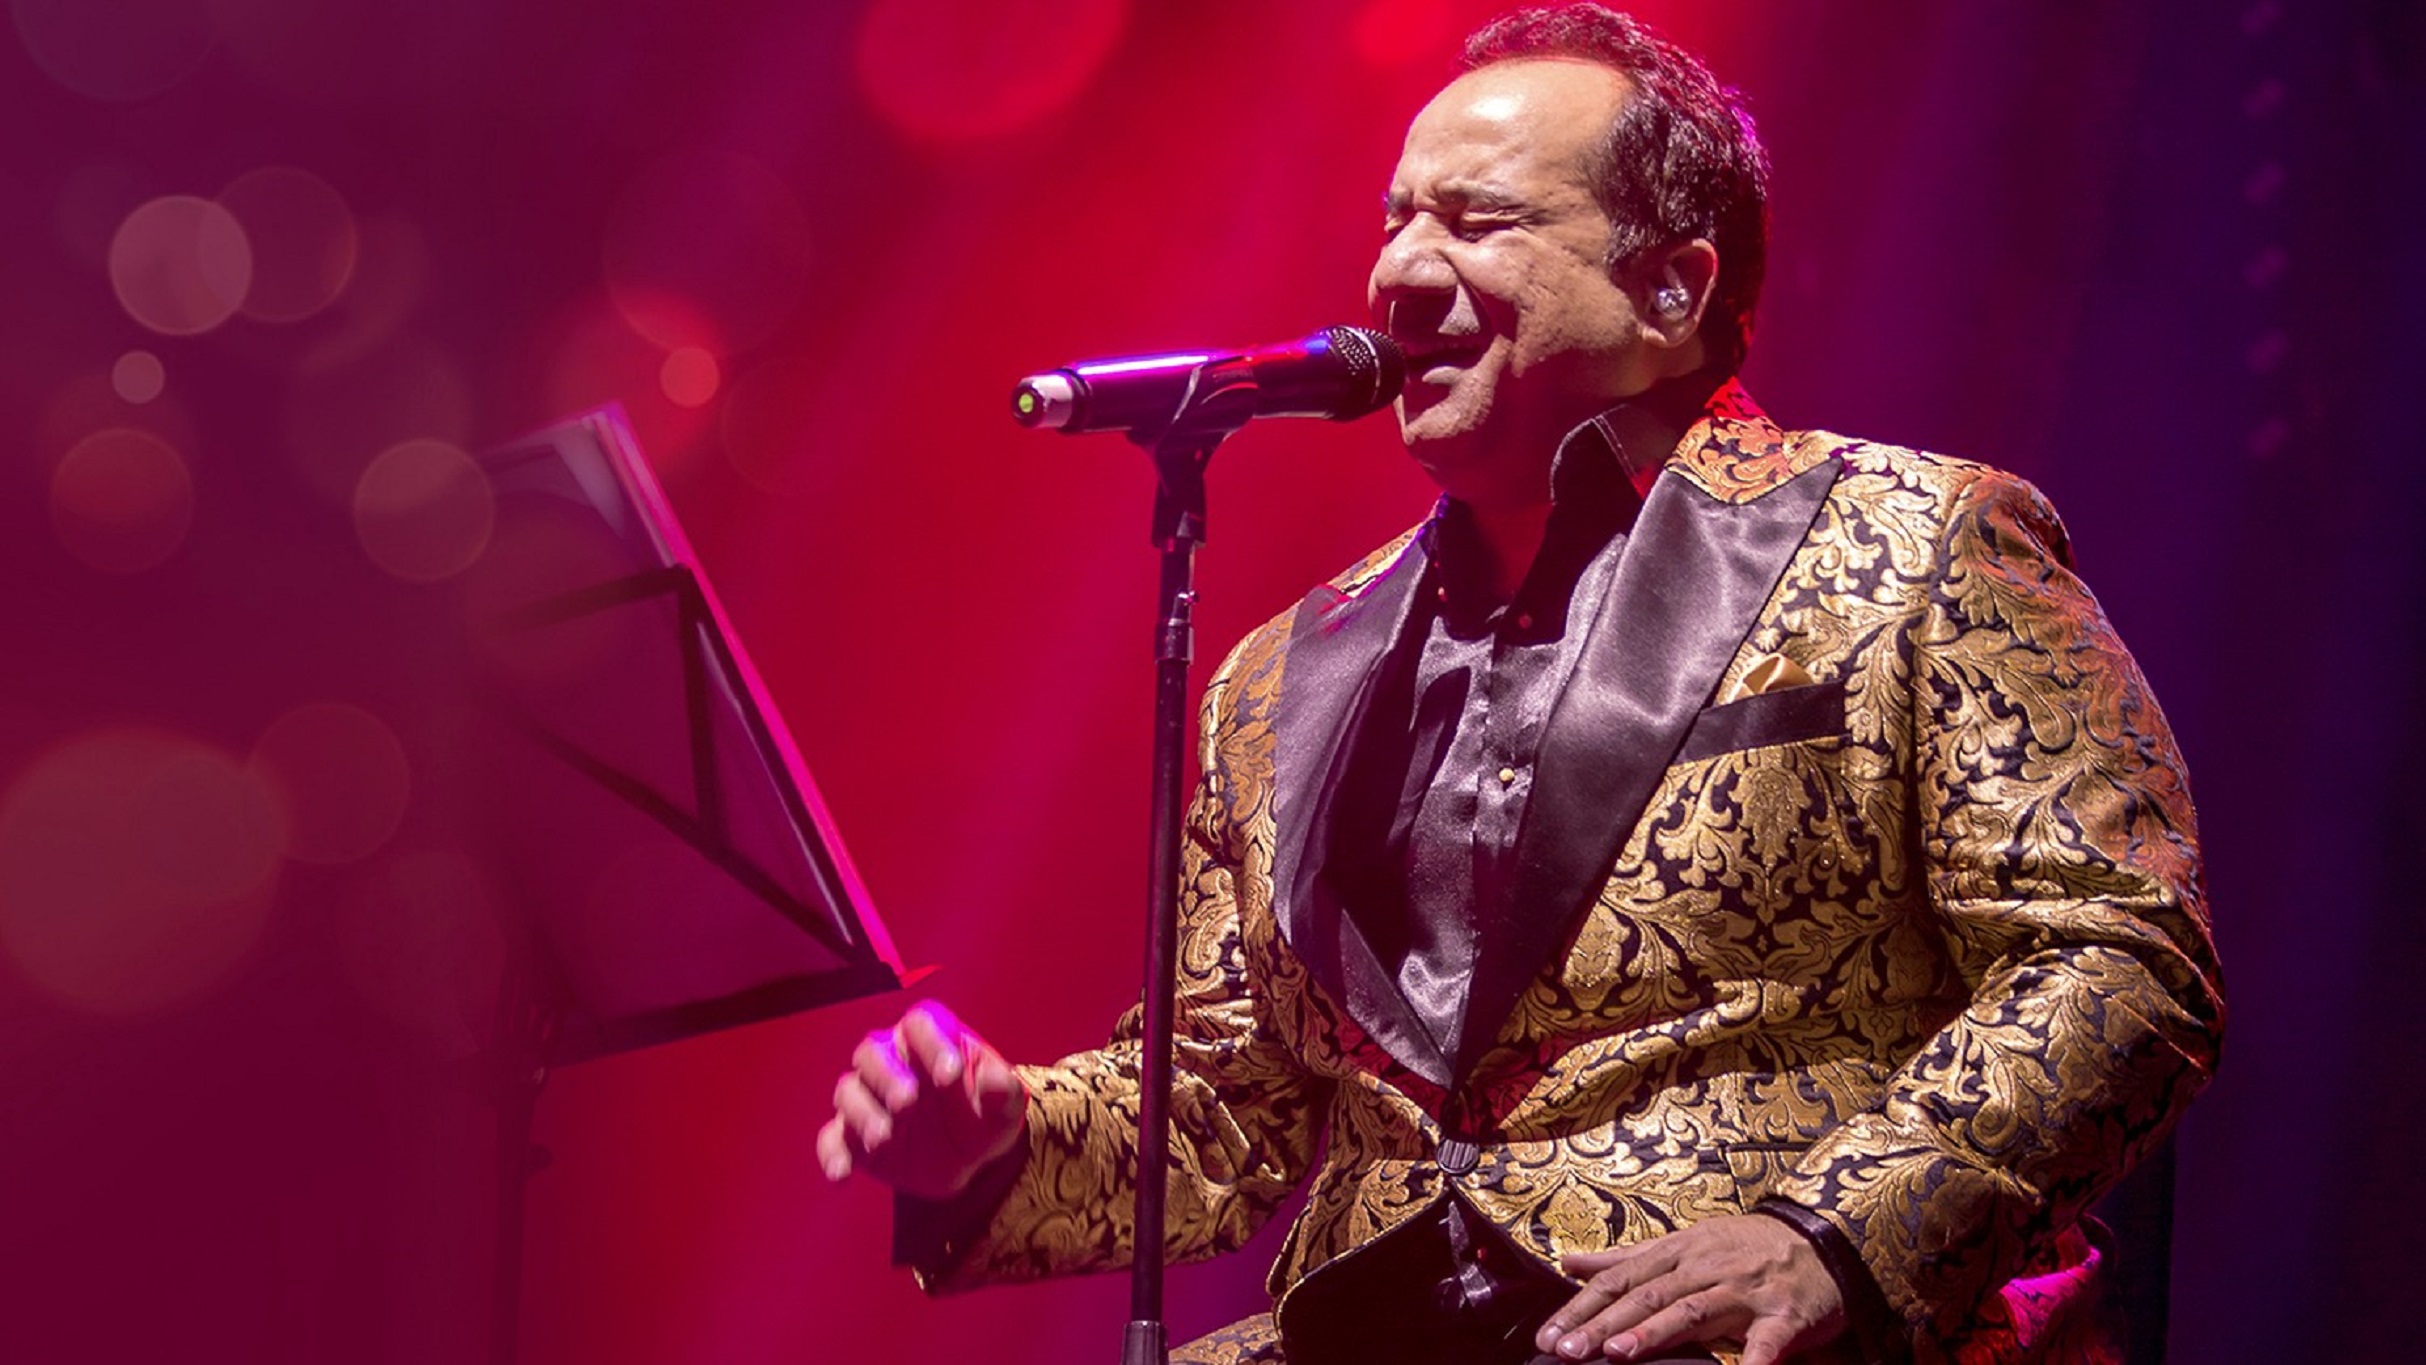 The Legacy of Khan's Continues with RAHAT FATEH ALI KHAN